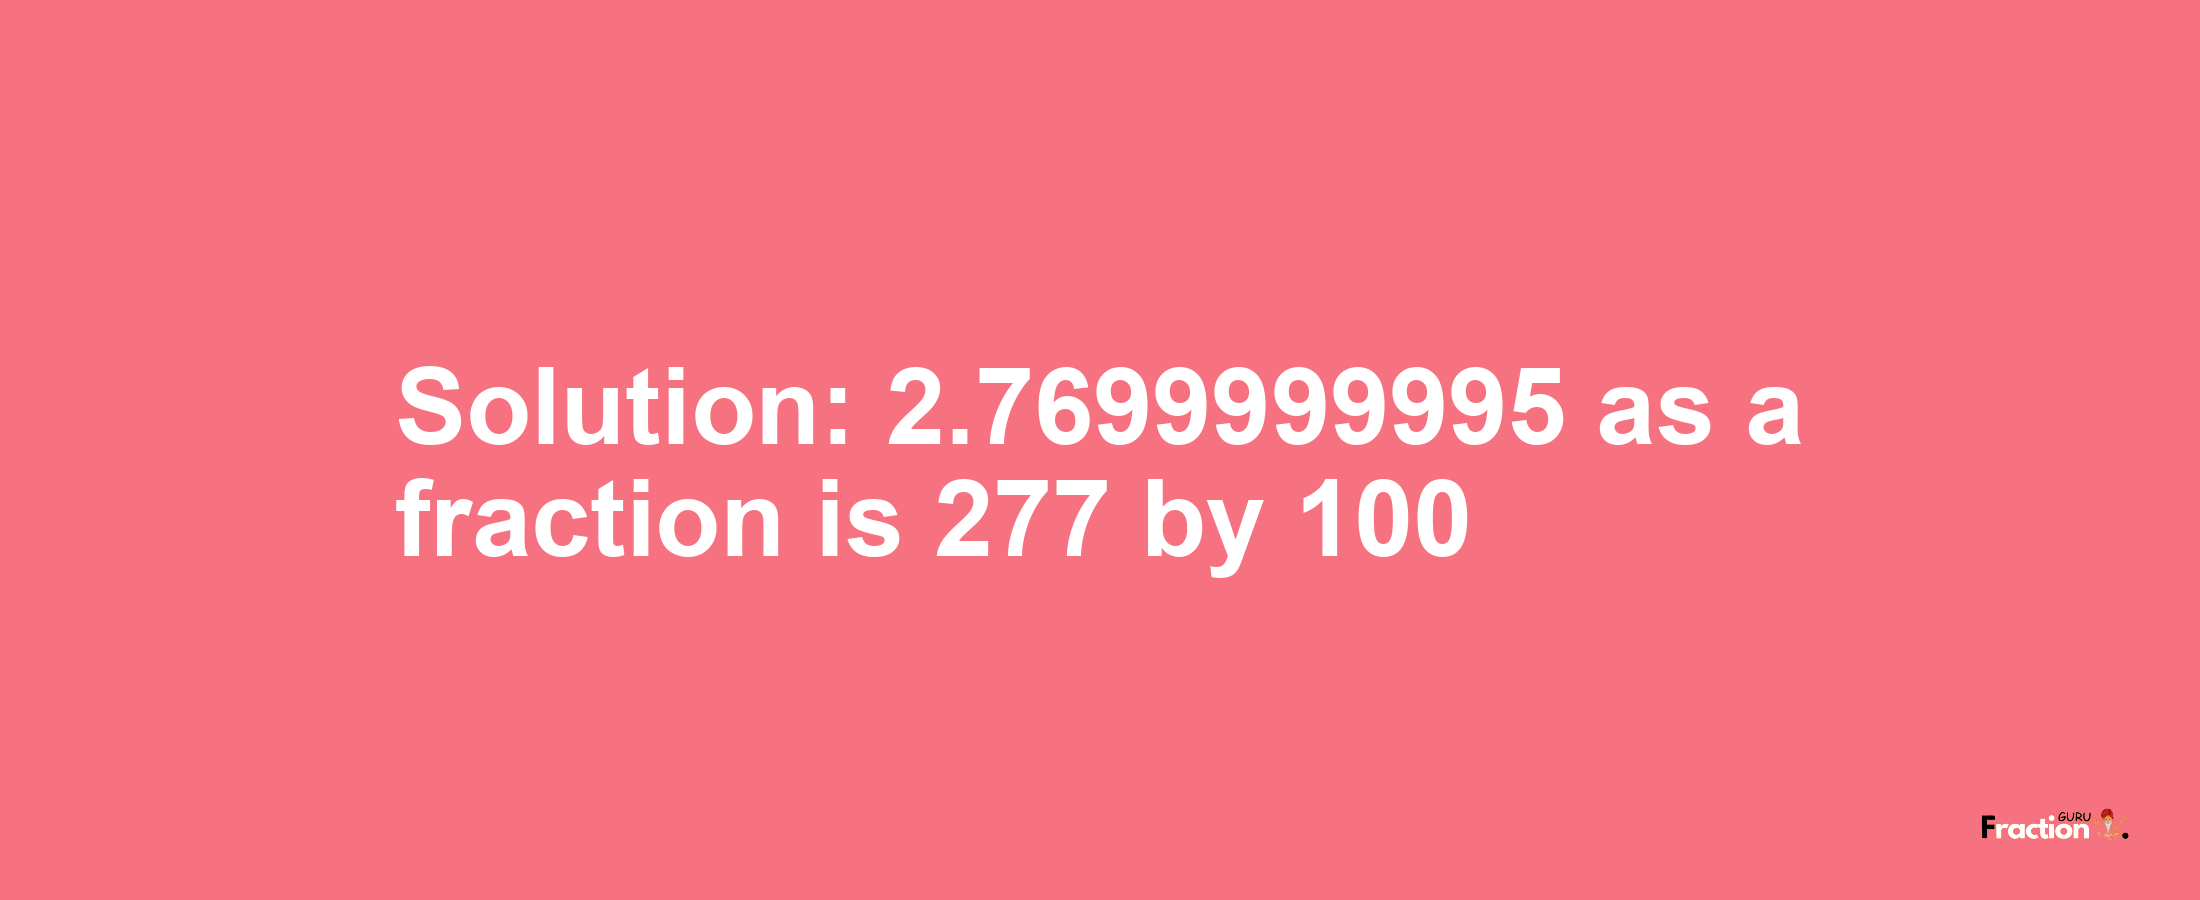 Solution:2.7699999995 as a fraction is 277/100